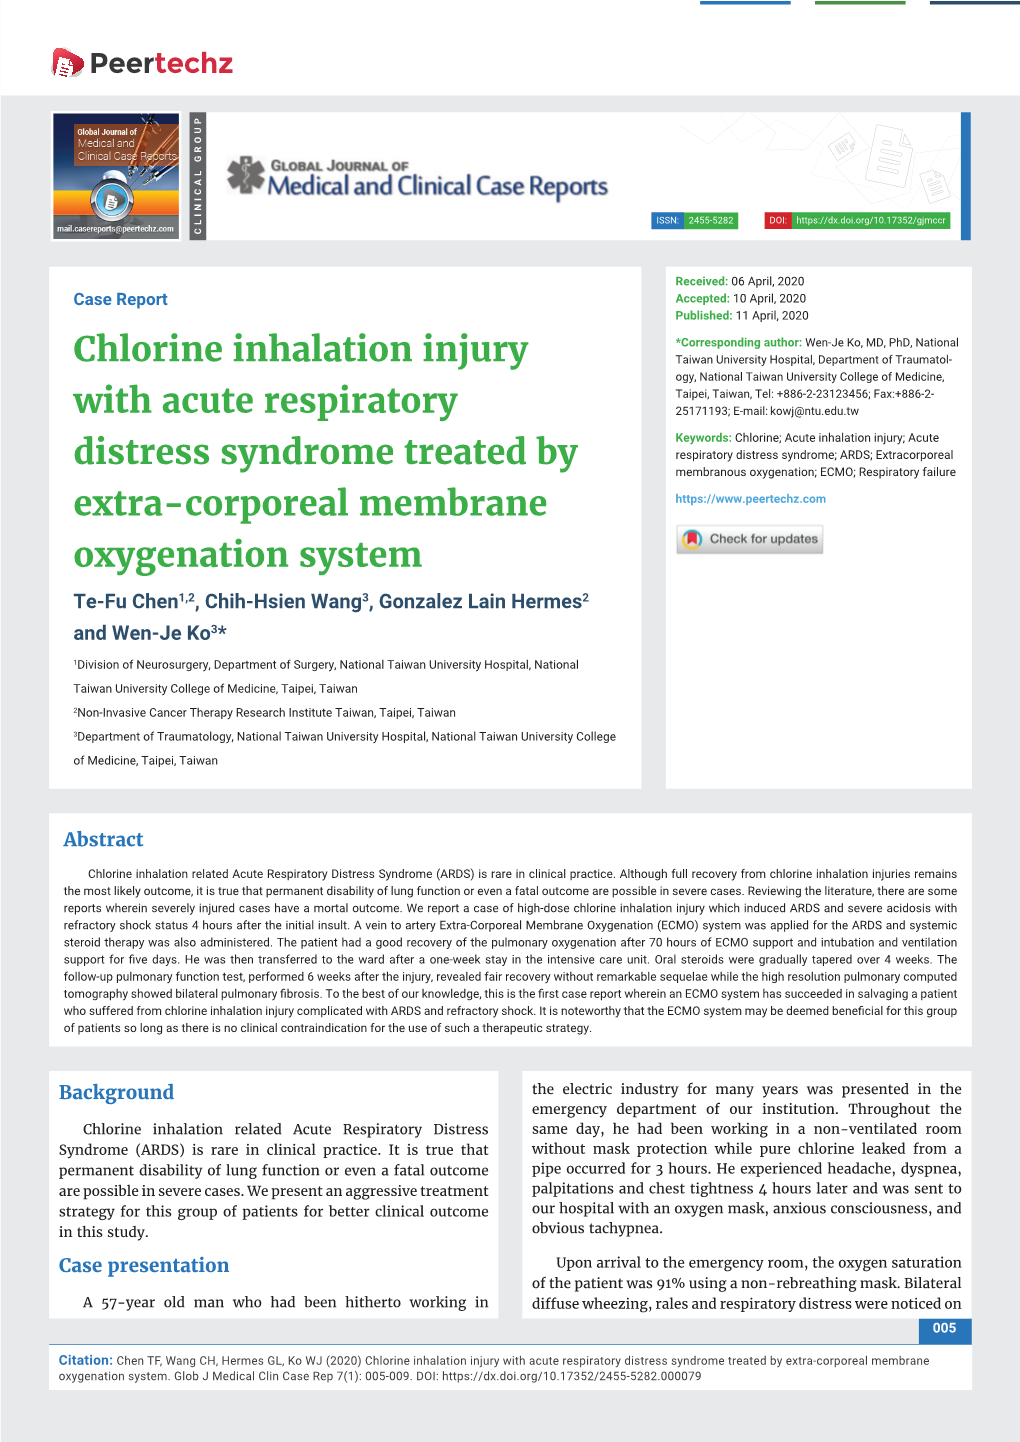 Chlorine Inhalation Injury with Acute Respiratory Distress Syndrome Treated by Extra-Corporeal Membrane Oxygenation System